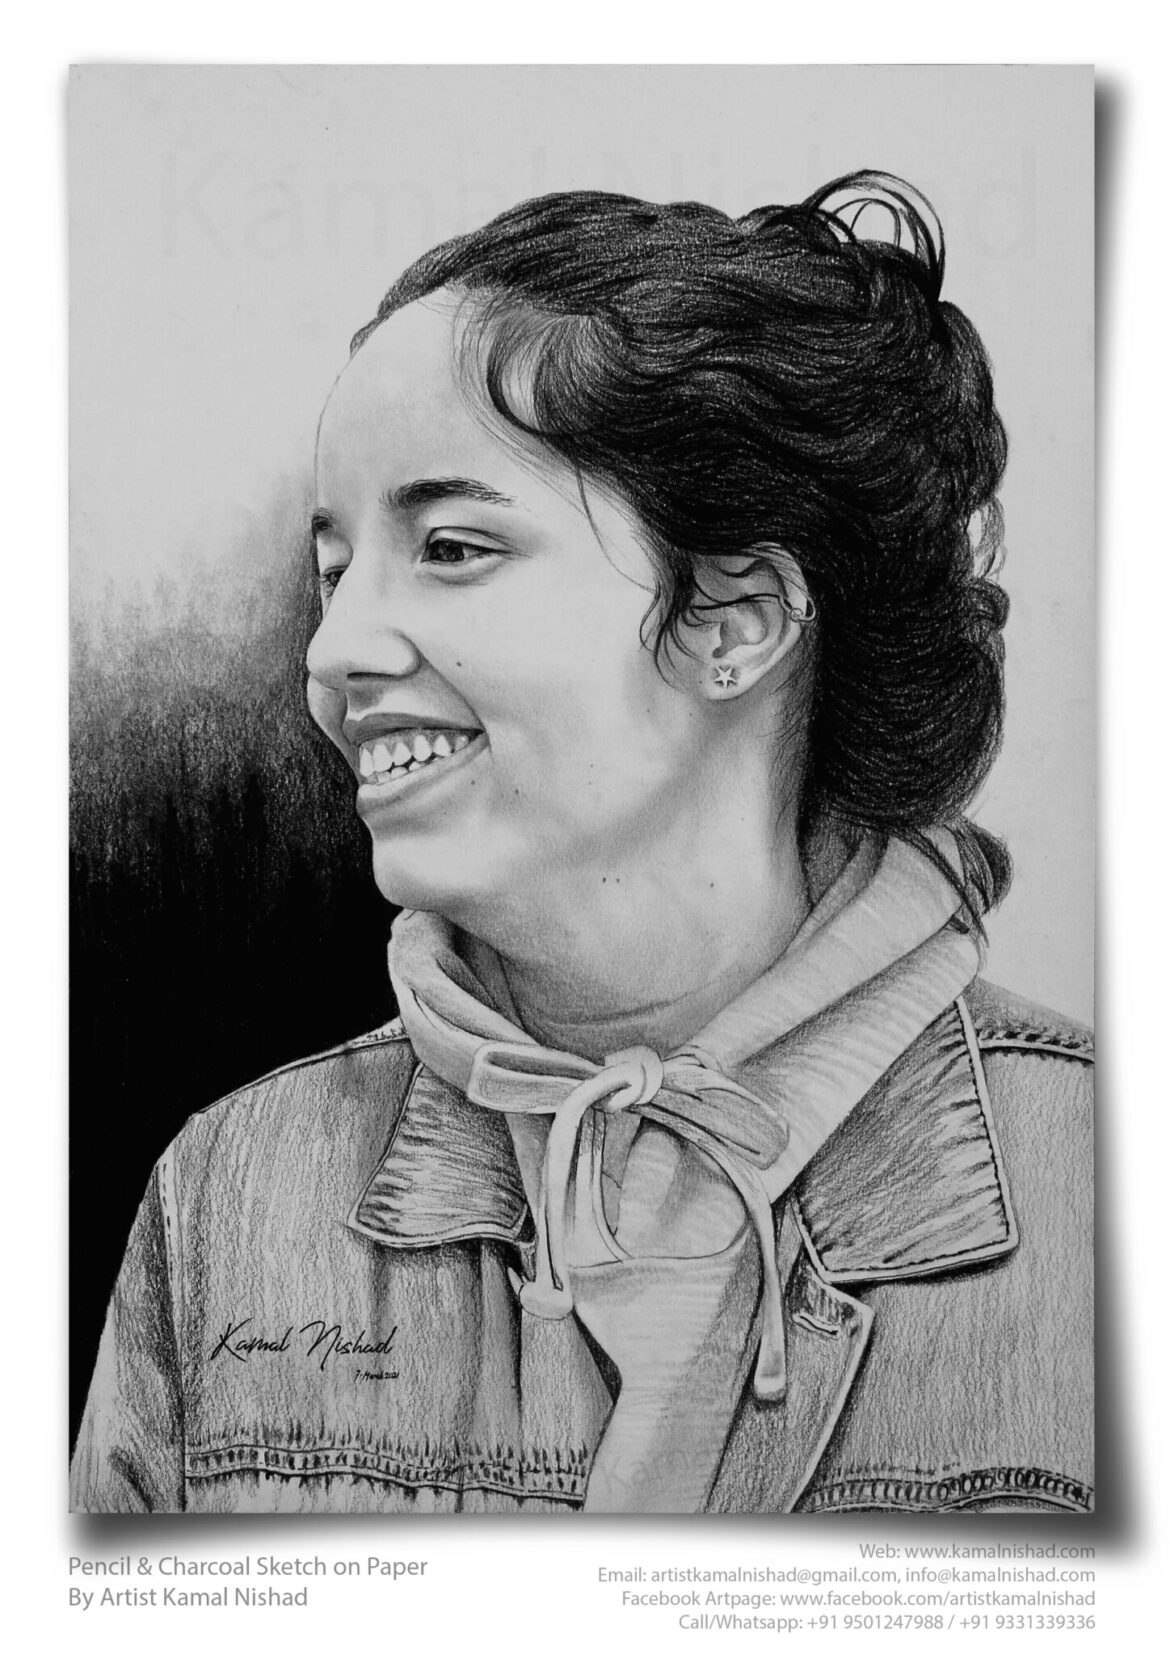 CUTE SMILE | Pencil & Charcoal Sketch Title : CUTE SMILE Medium : Pencil & Charcoal Sketch Size : A3 Paper size (Sketch size 29.7 x 42.0 cm*) Artist : Kamal Nishad This is a Handmade/hand-drawn Sketch made with Pencil & Charcoal “CUTE SMILE”. This is a Gift from One of my Client to her friend. 💐 SIZE: Paper size A3 (work area 11.7 x 16.5 inches *estimated) Created by © Kamal Nishad. All rights reserved.